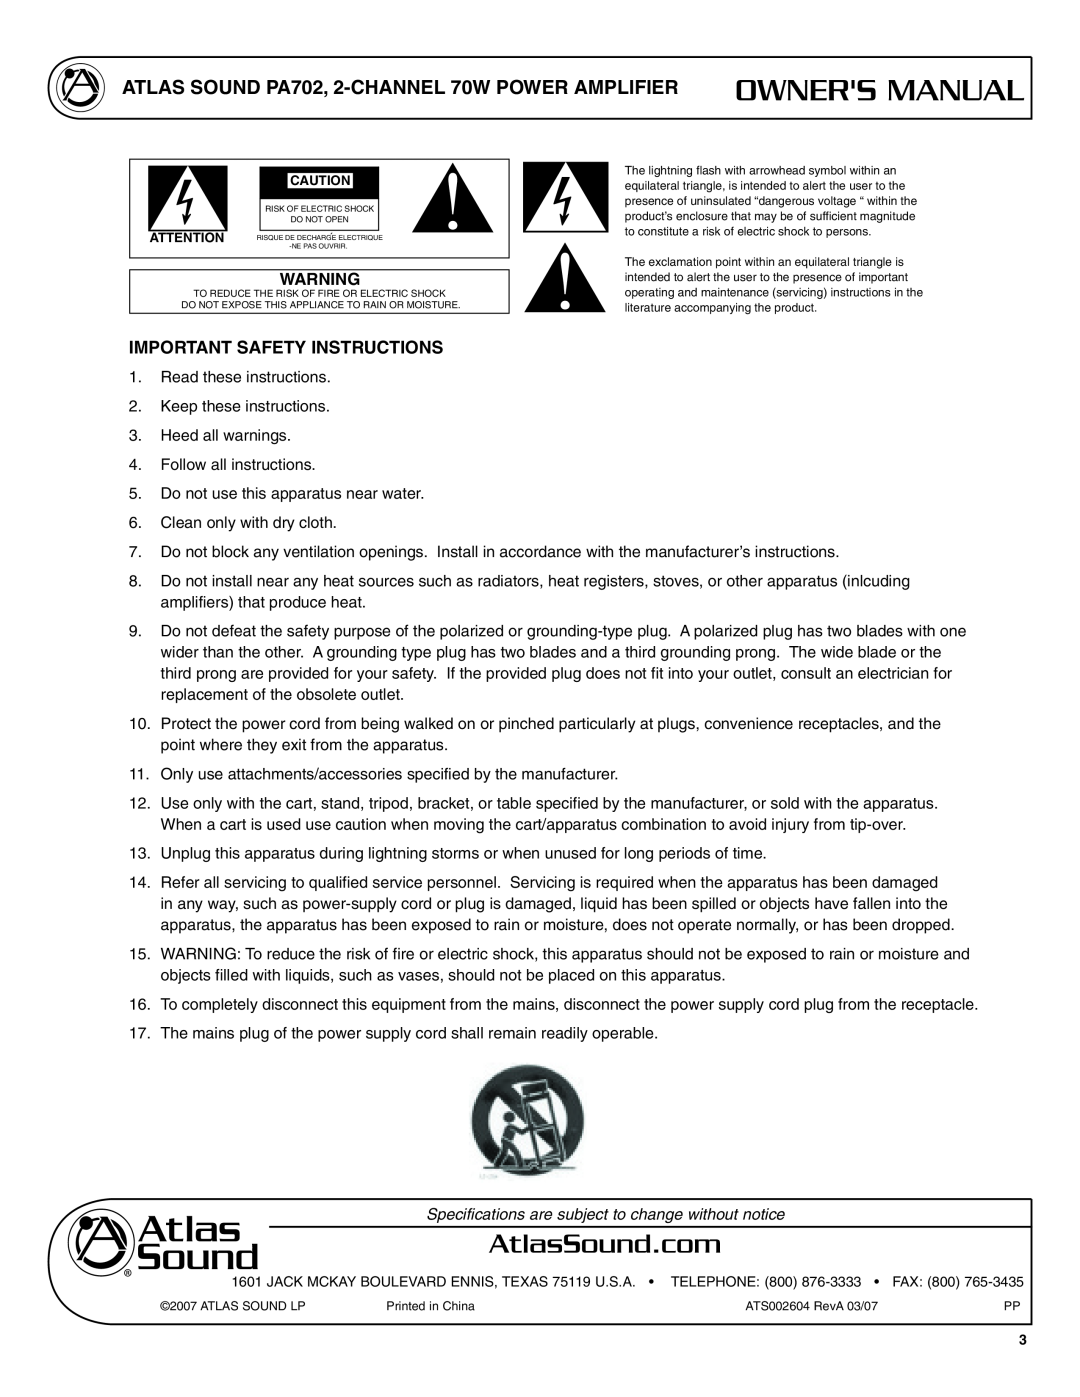 Atlas Sound PA702 specifications Important Safety Instructions 